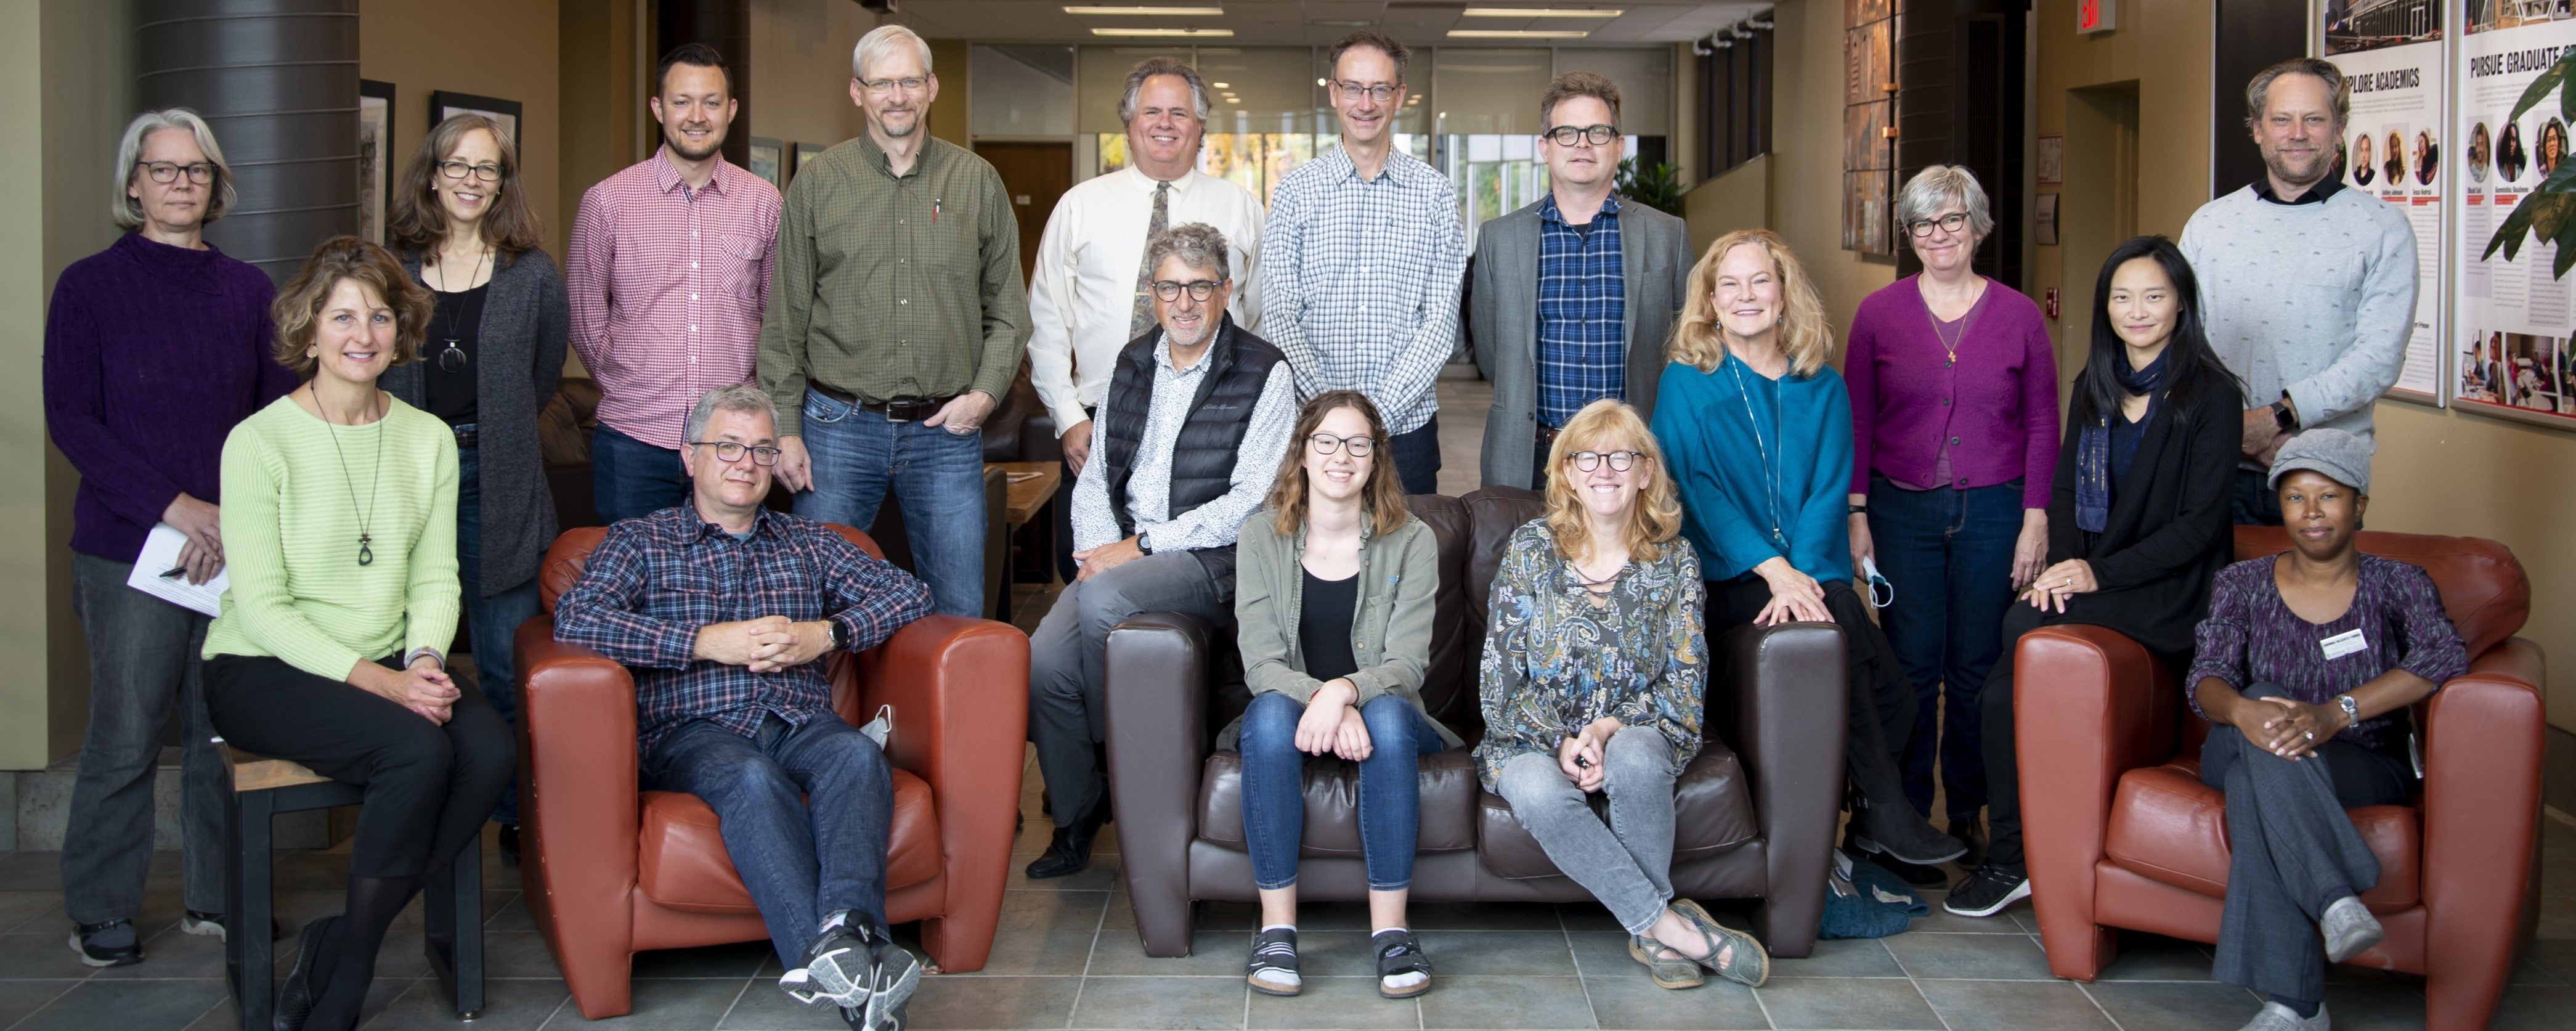 Fall 2022 College faculty gathered in a group for a photo in Grebel Atrium